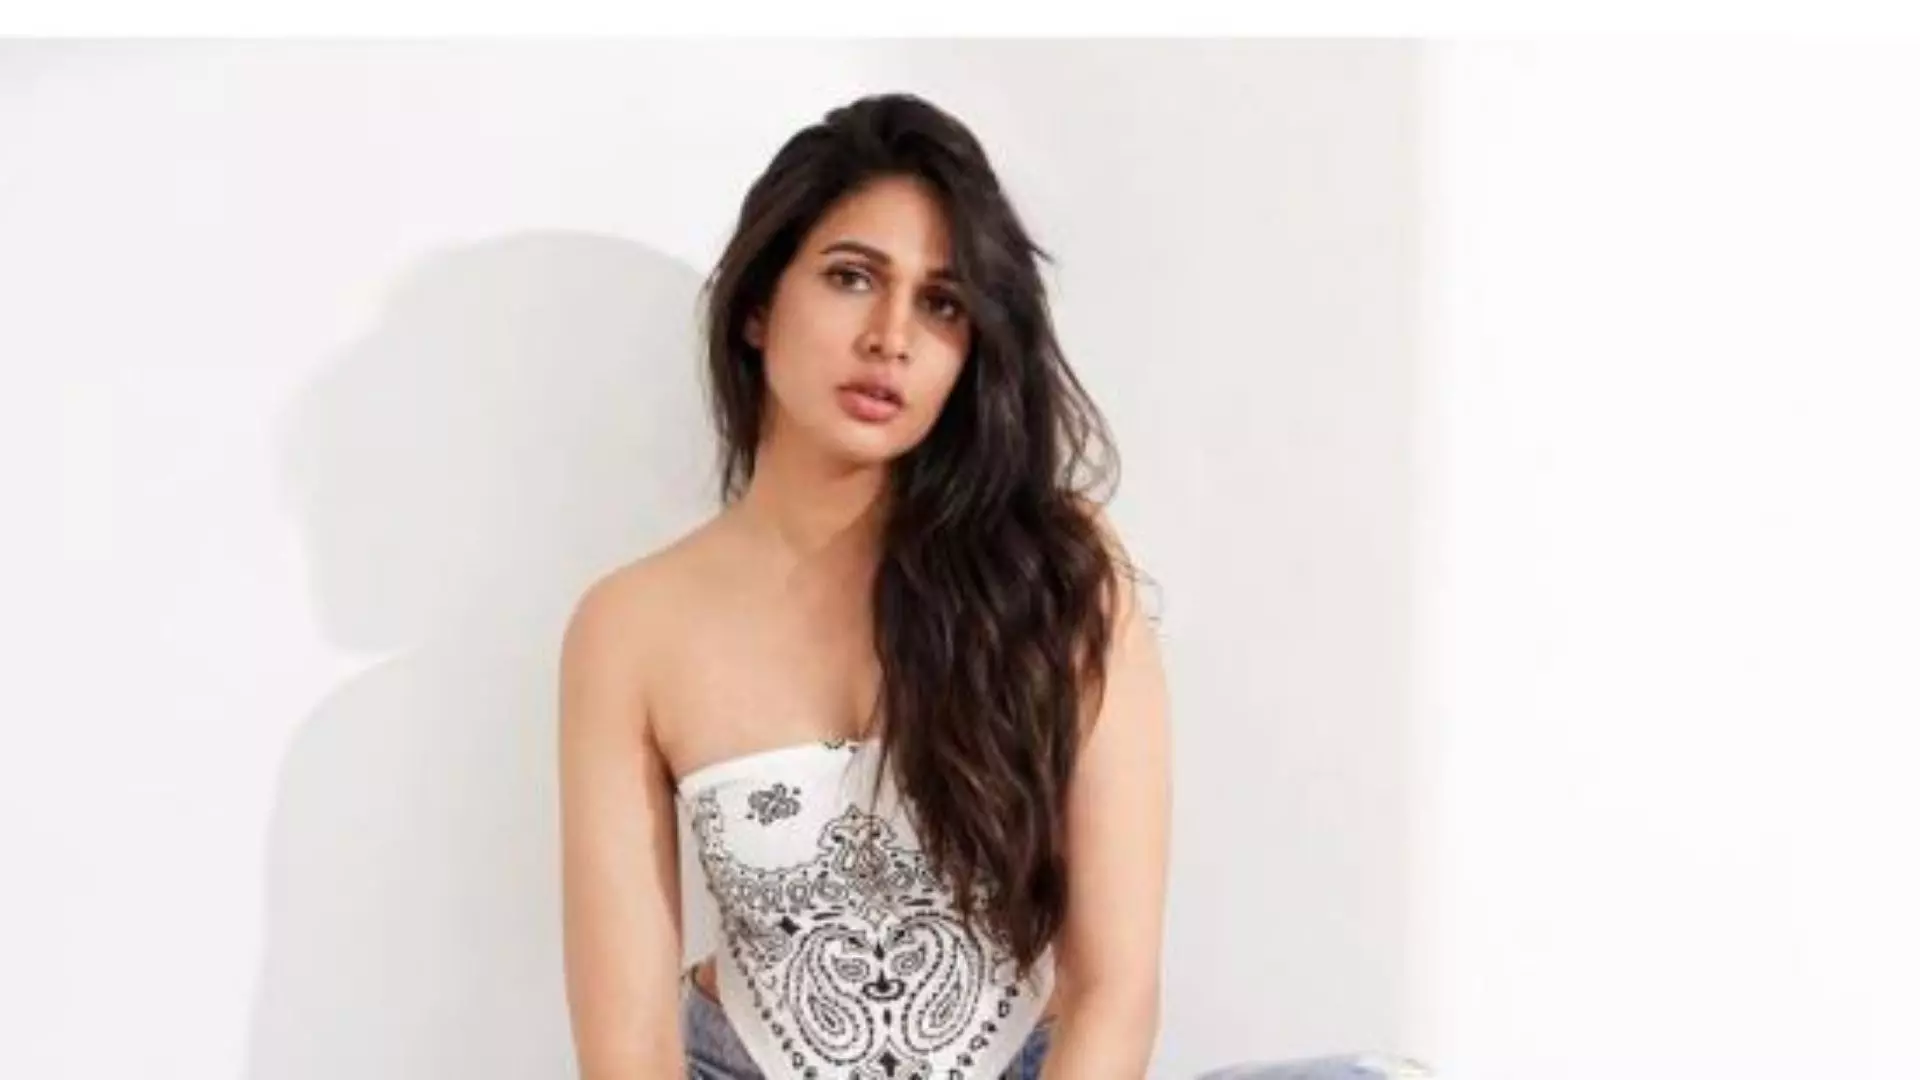 Actress Lavanya Tripathi is Going to Act Key Role in Crime Comedy Movie